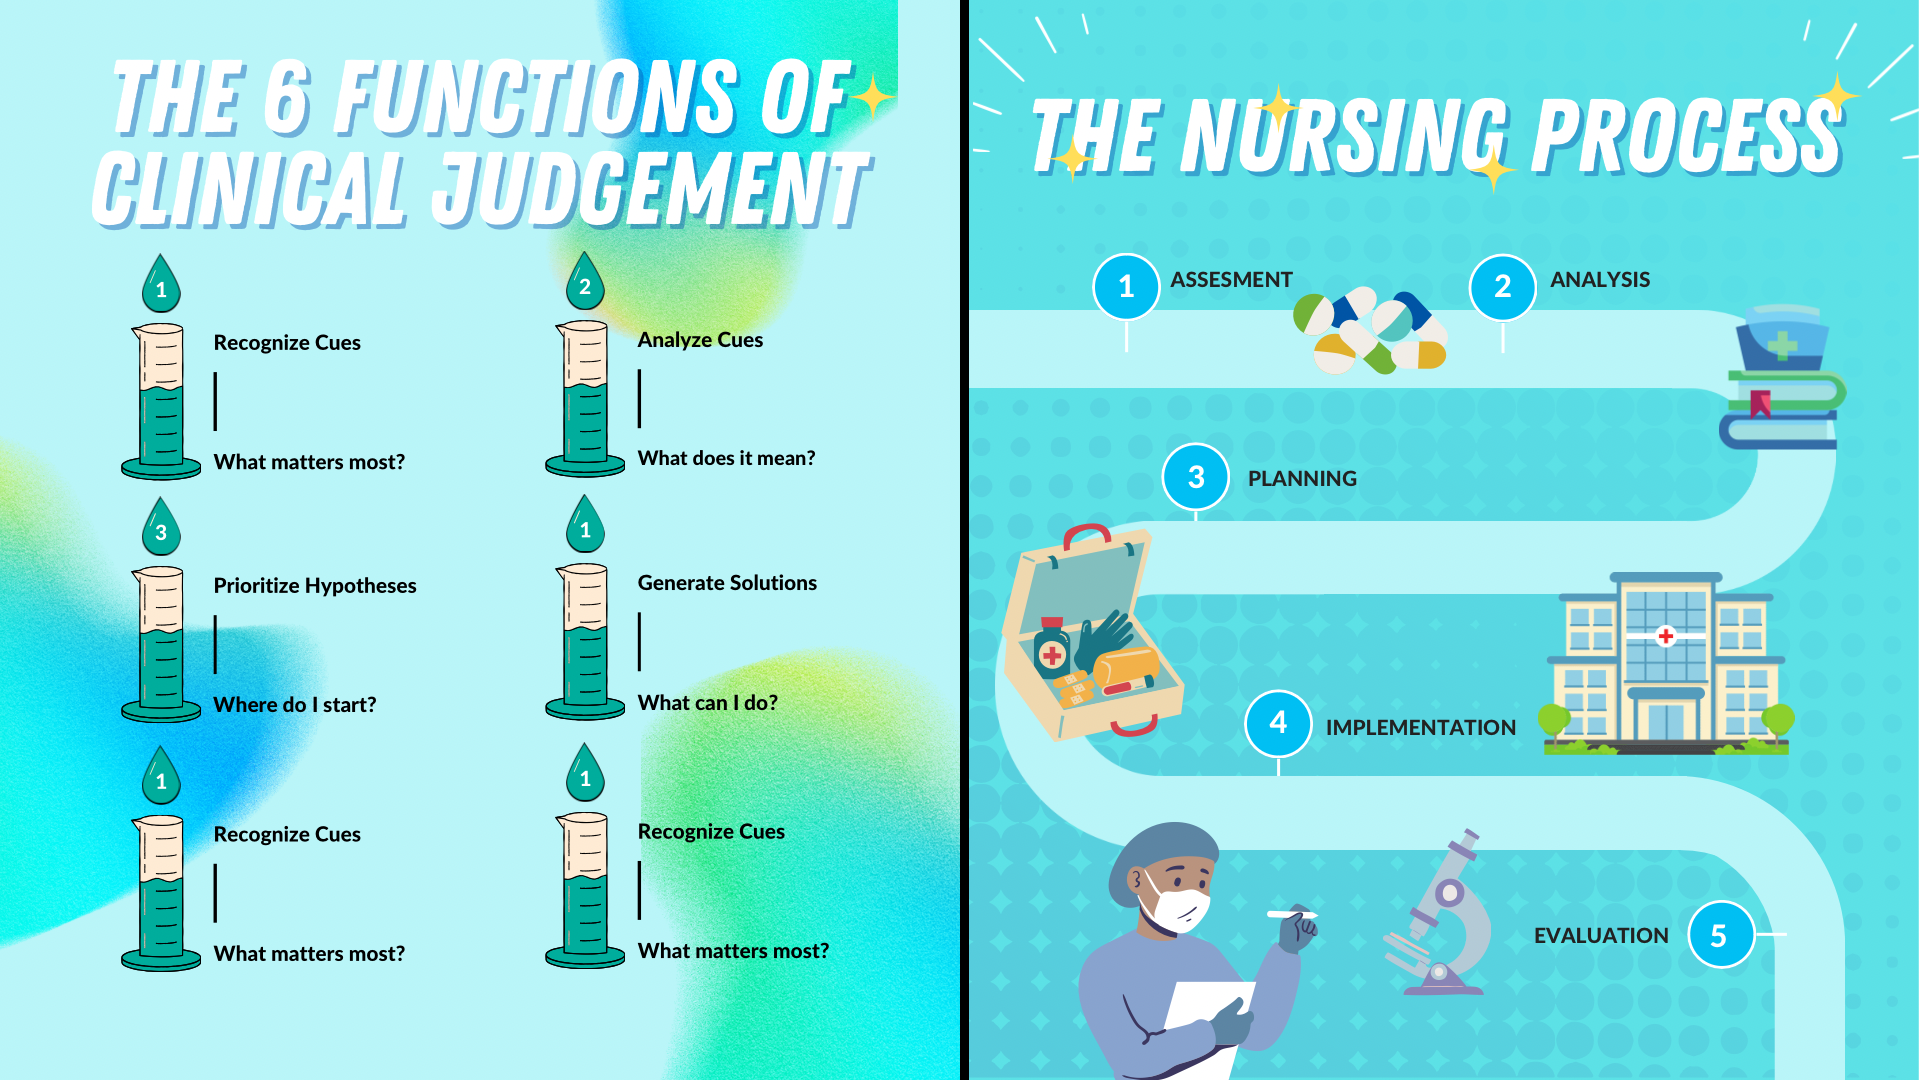 ncsbn-clinical-judgment-measurement-model-and-the-nursing-process-alagarn